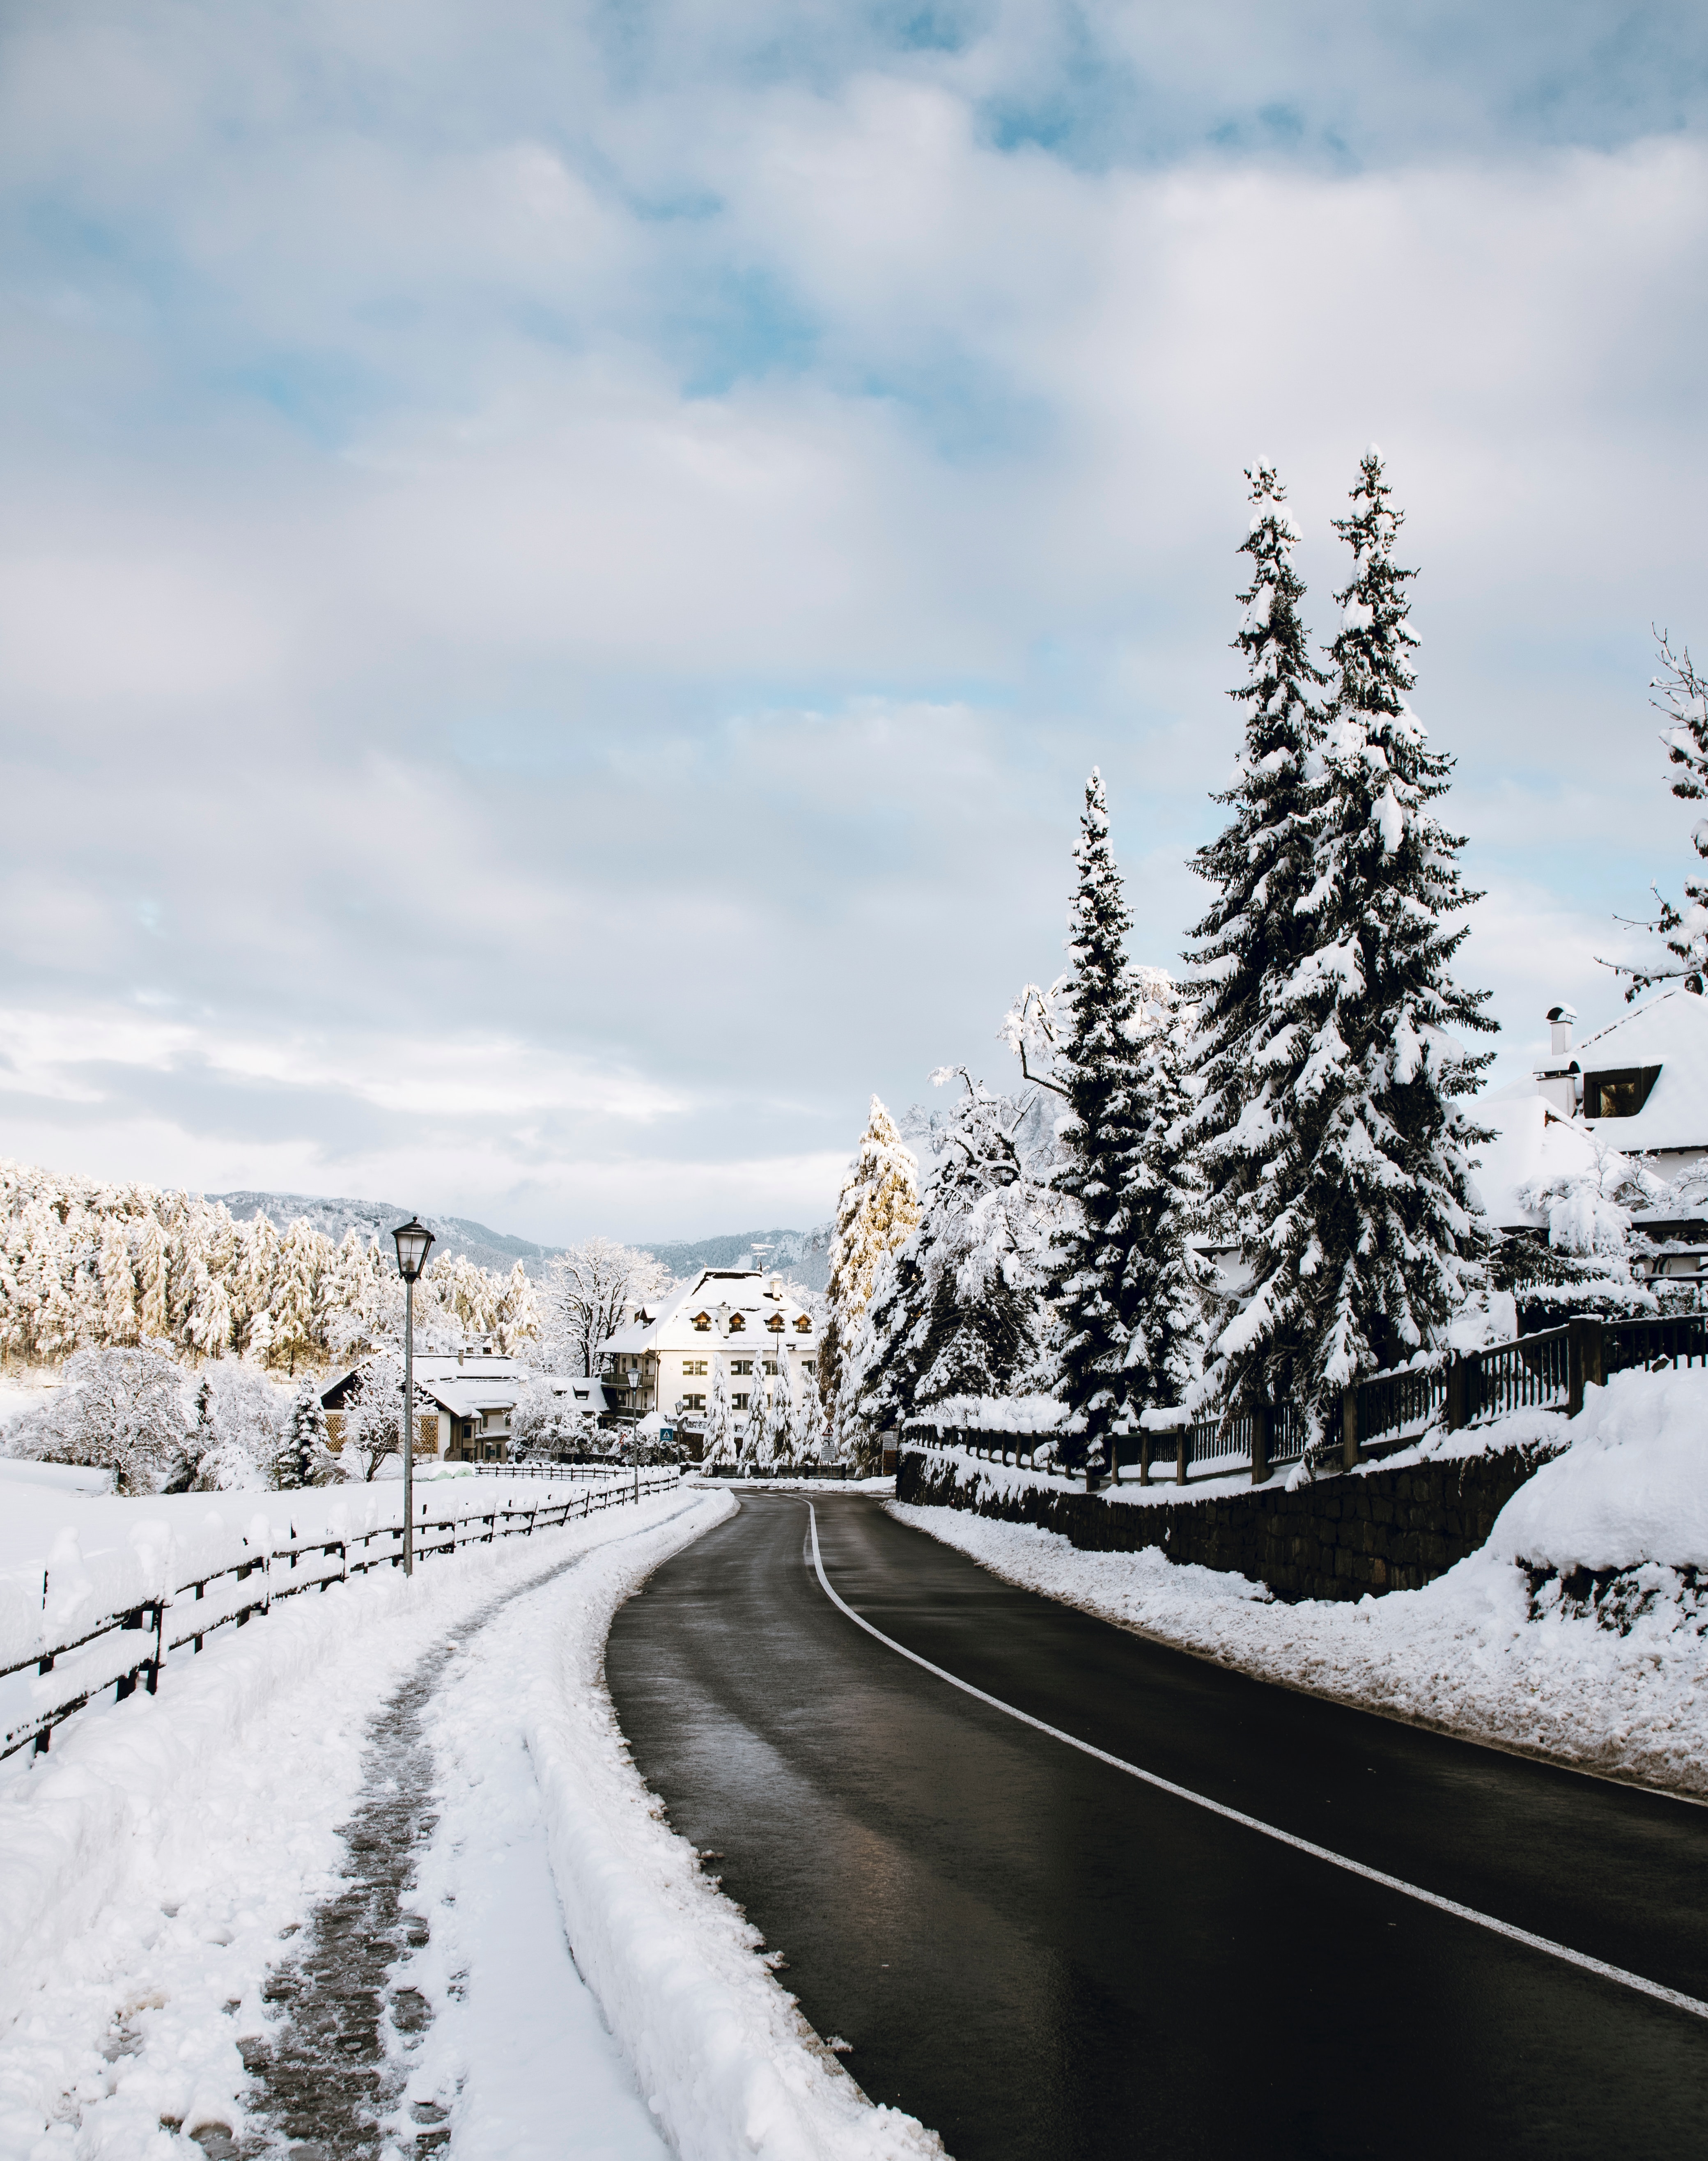 63012 download wallpaper snow, winter, nature, road screensavers and pictures for free